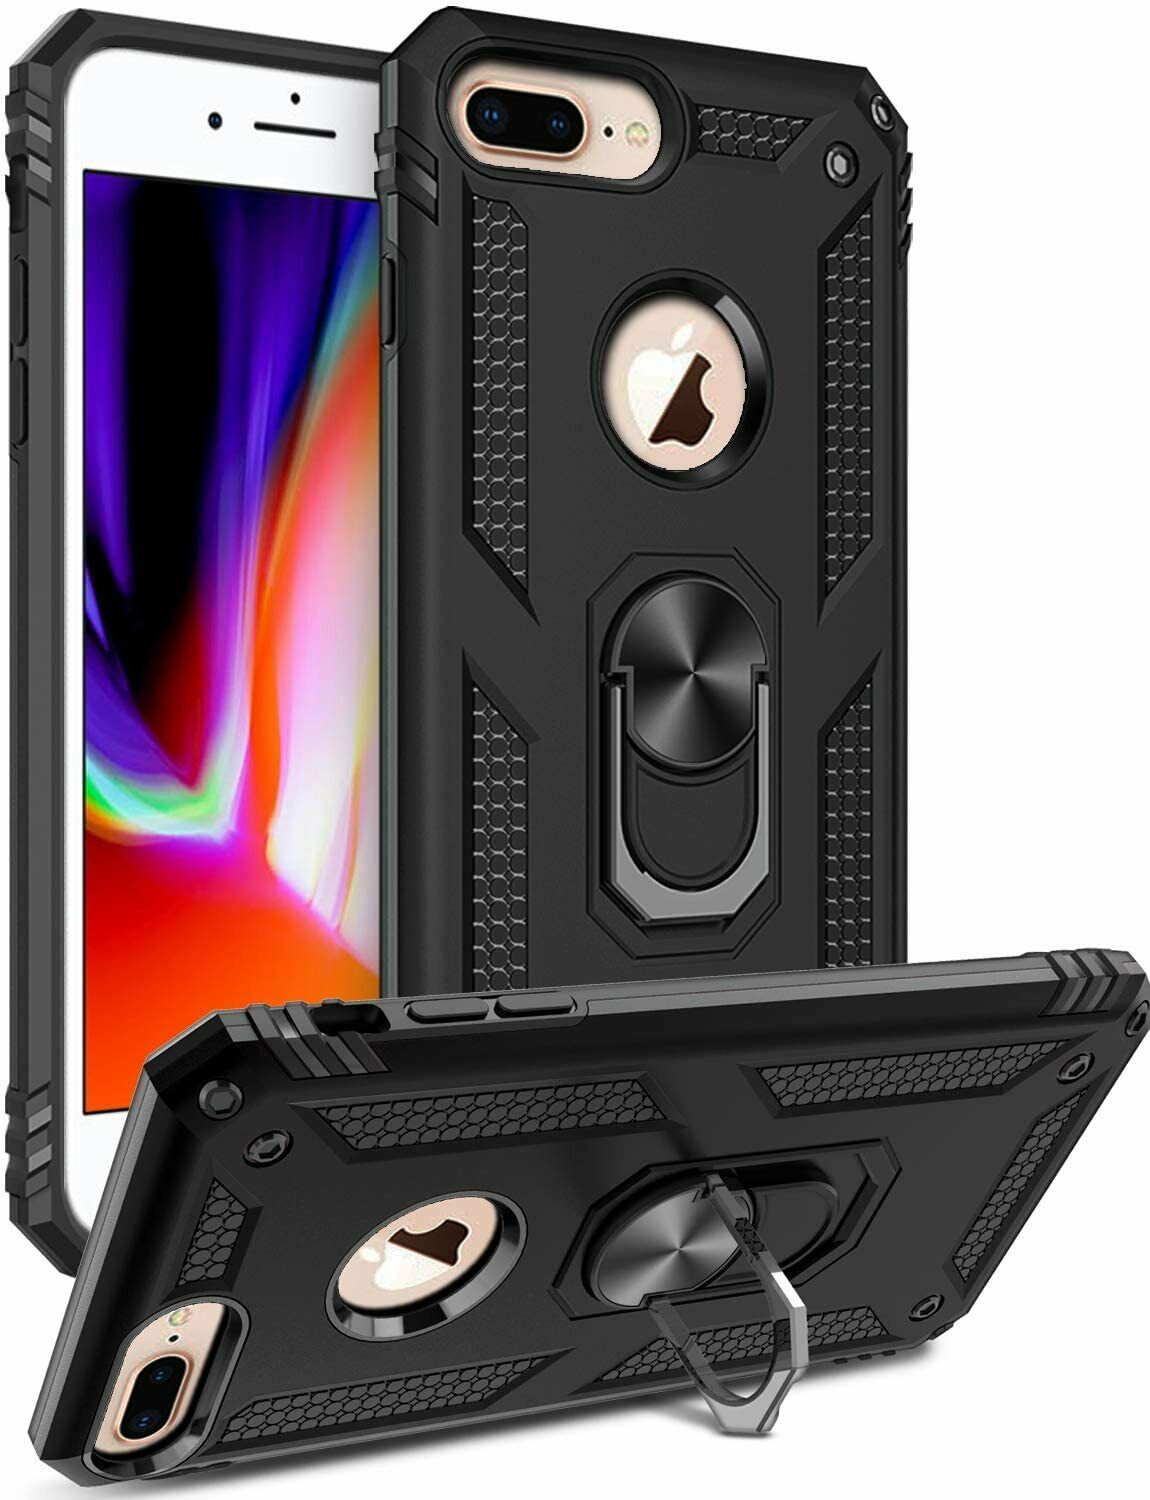 For iPhone 11 Pro 6 6s 7 8 Plus XS Max XR X Case Kickstand Shockproof Ring Cover storm-buy 